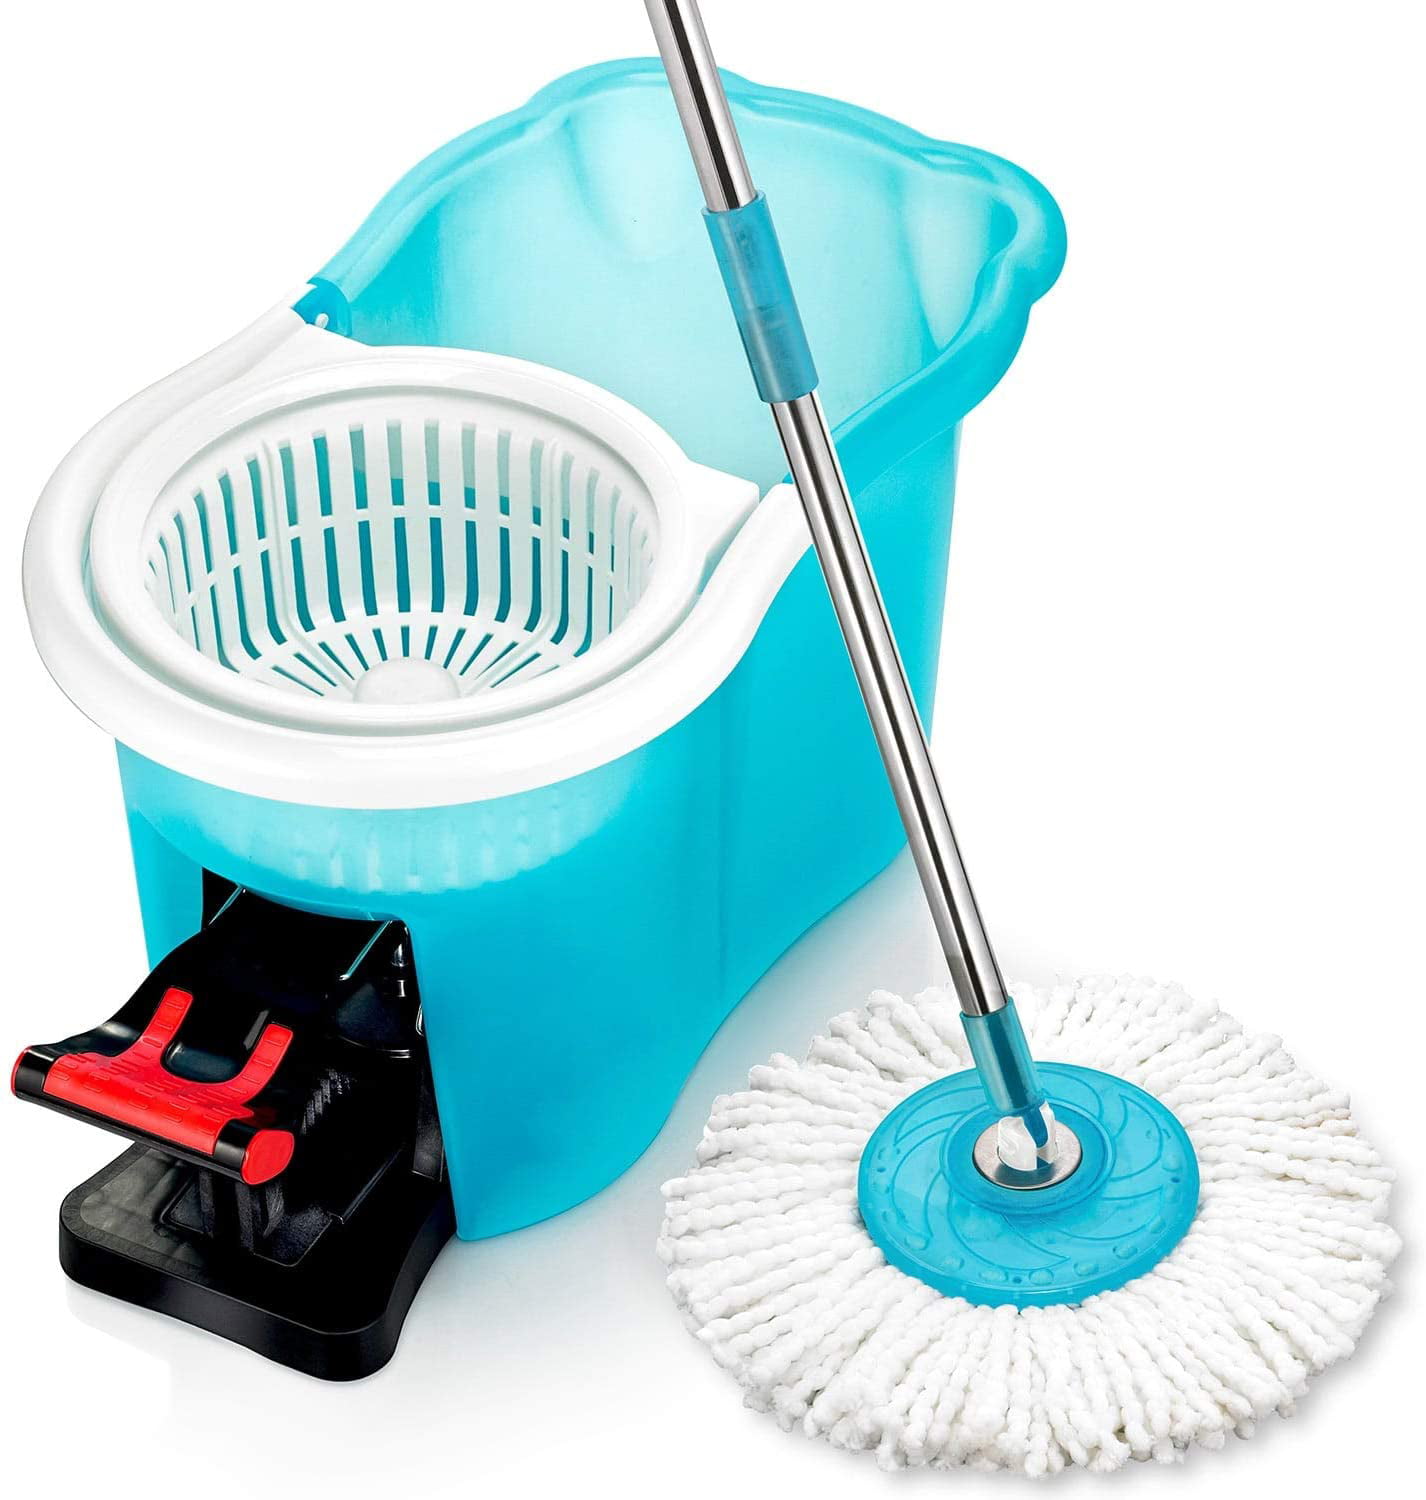 Hurricane Spin Mop Home Cleaning System, Hardwood Floor Cleaner Mop